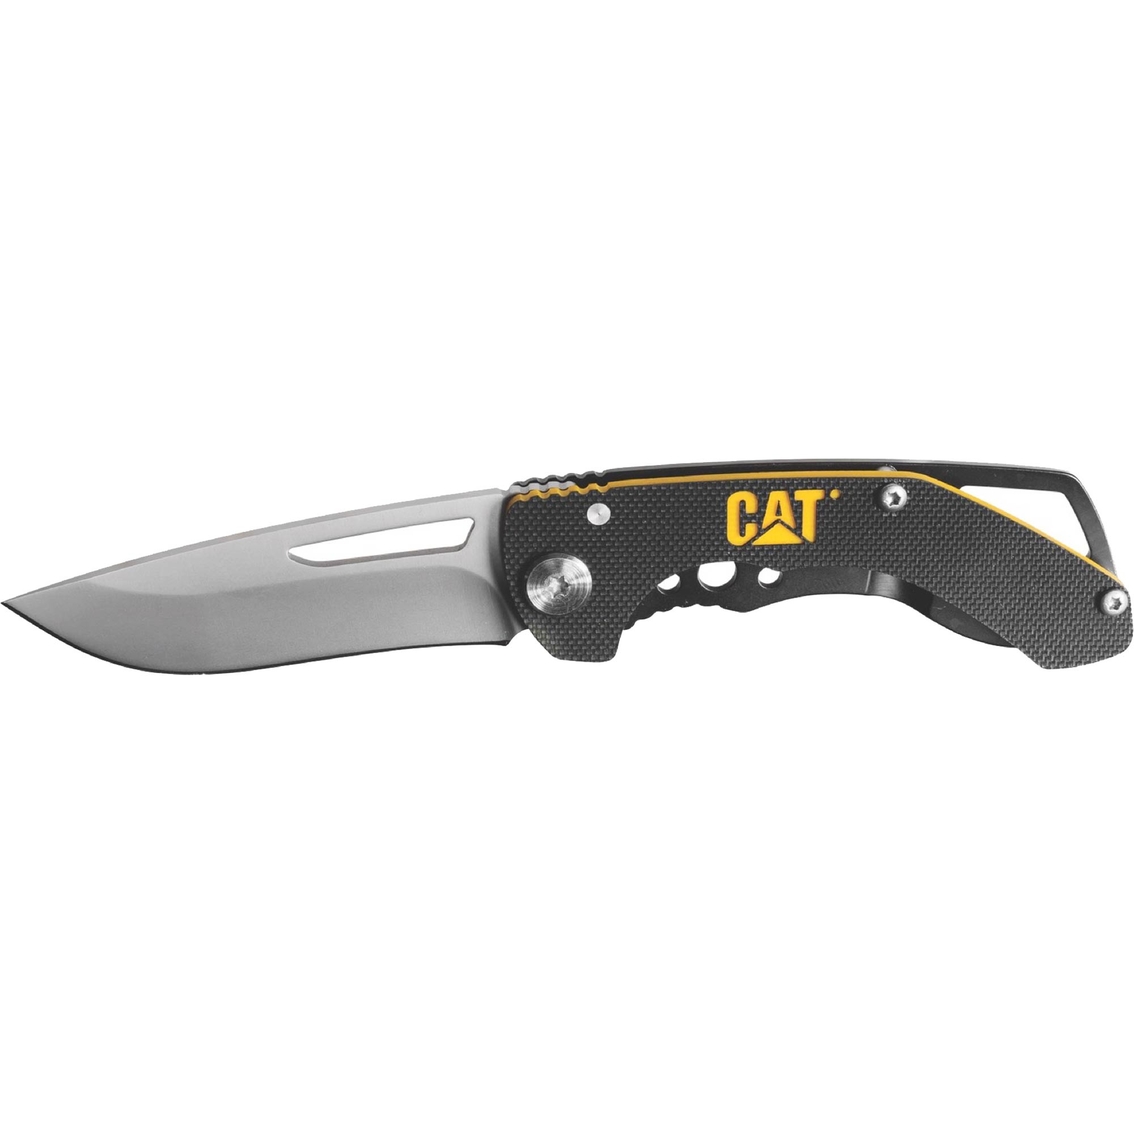 CAT 980009 5.5 in. Drop Point Folding Knife - Image 2 of 3